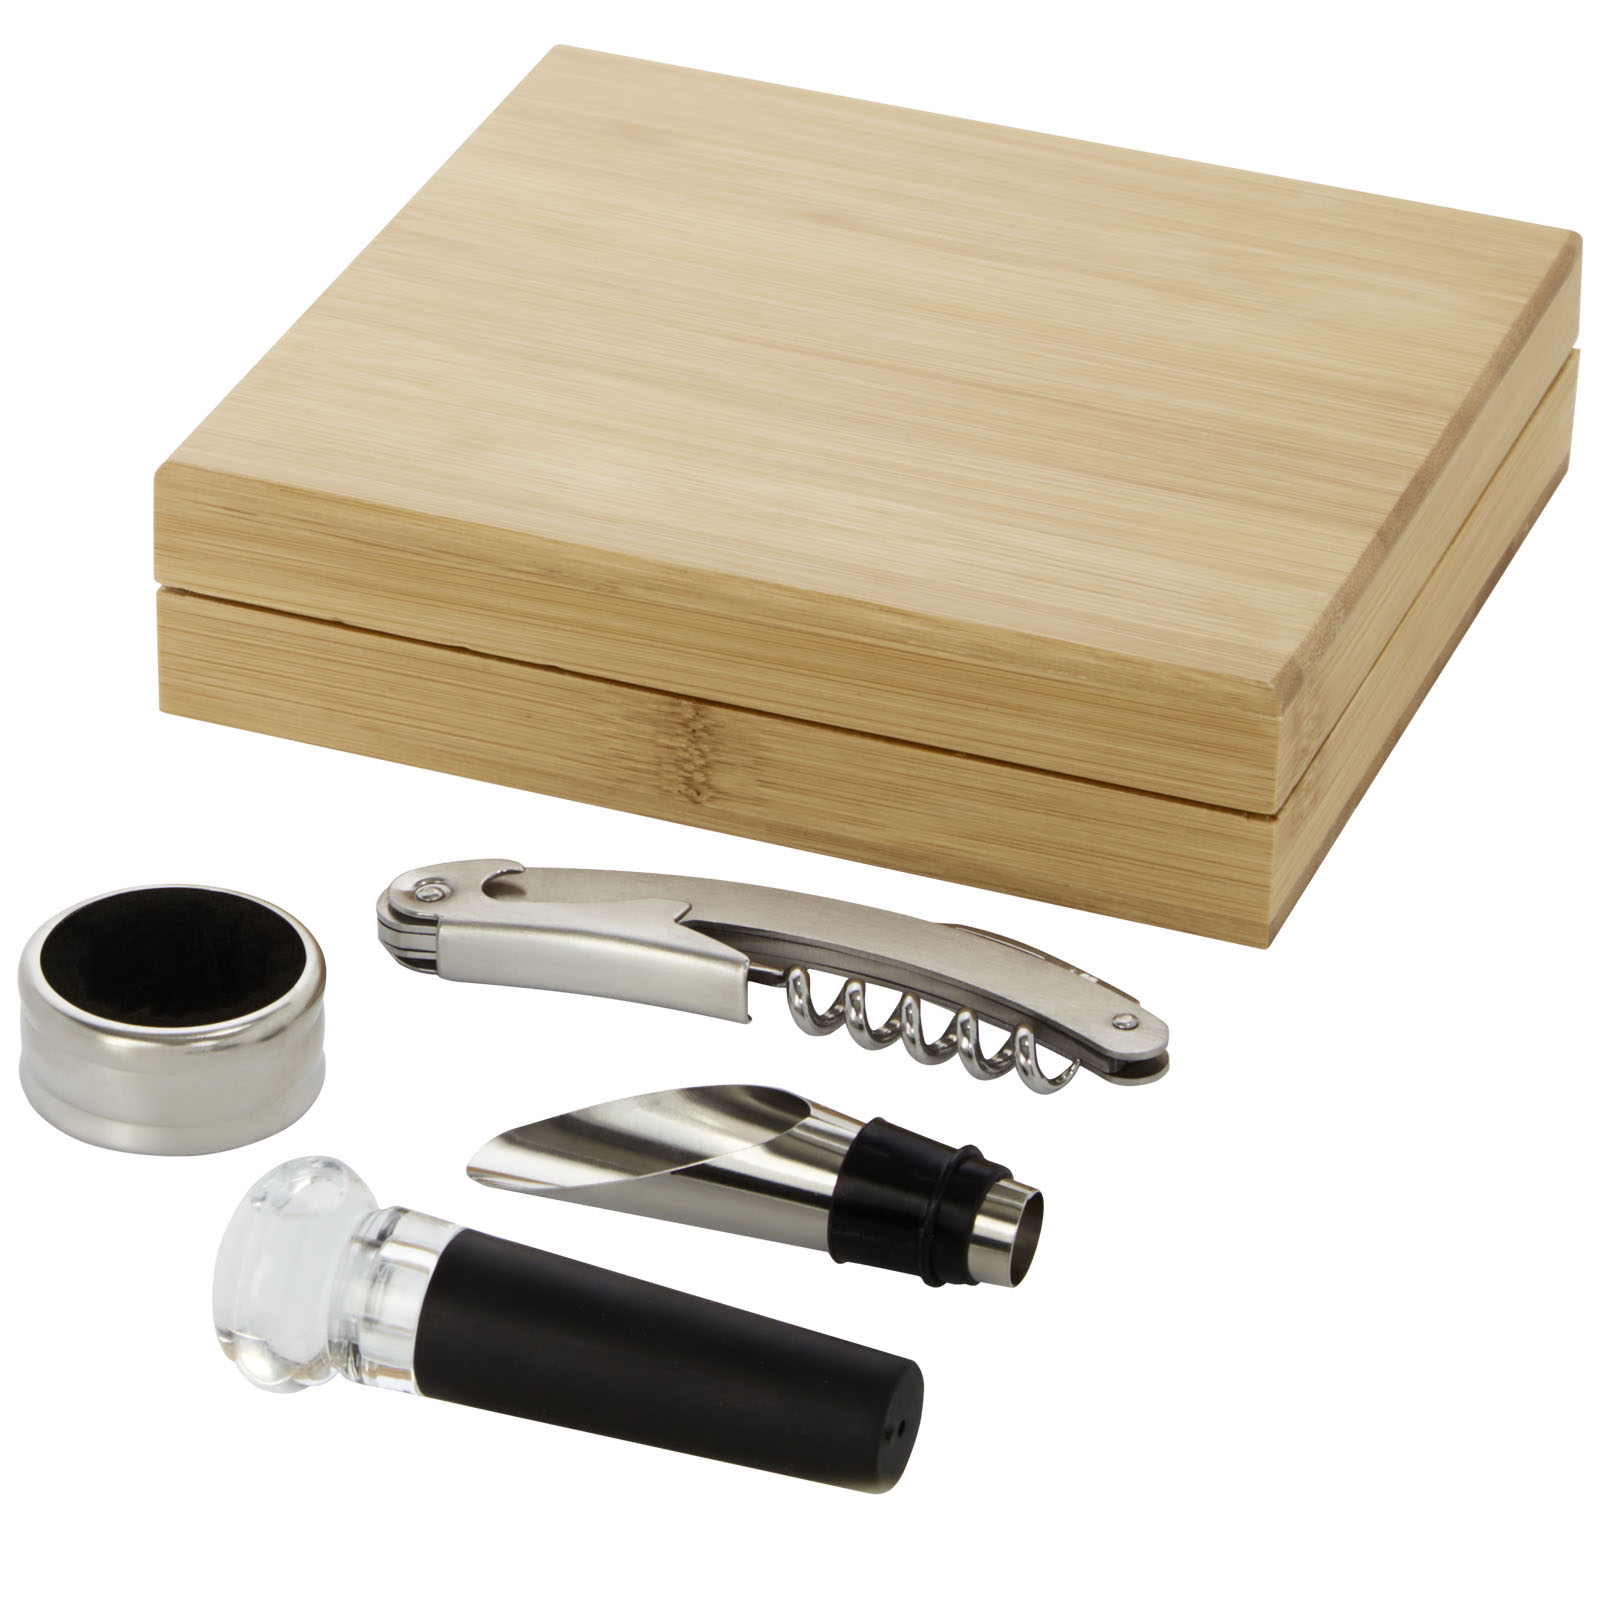 Wine accessory set DESIREE in bamboo case, 4 pcs - natural / silver